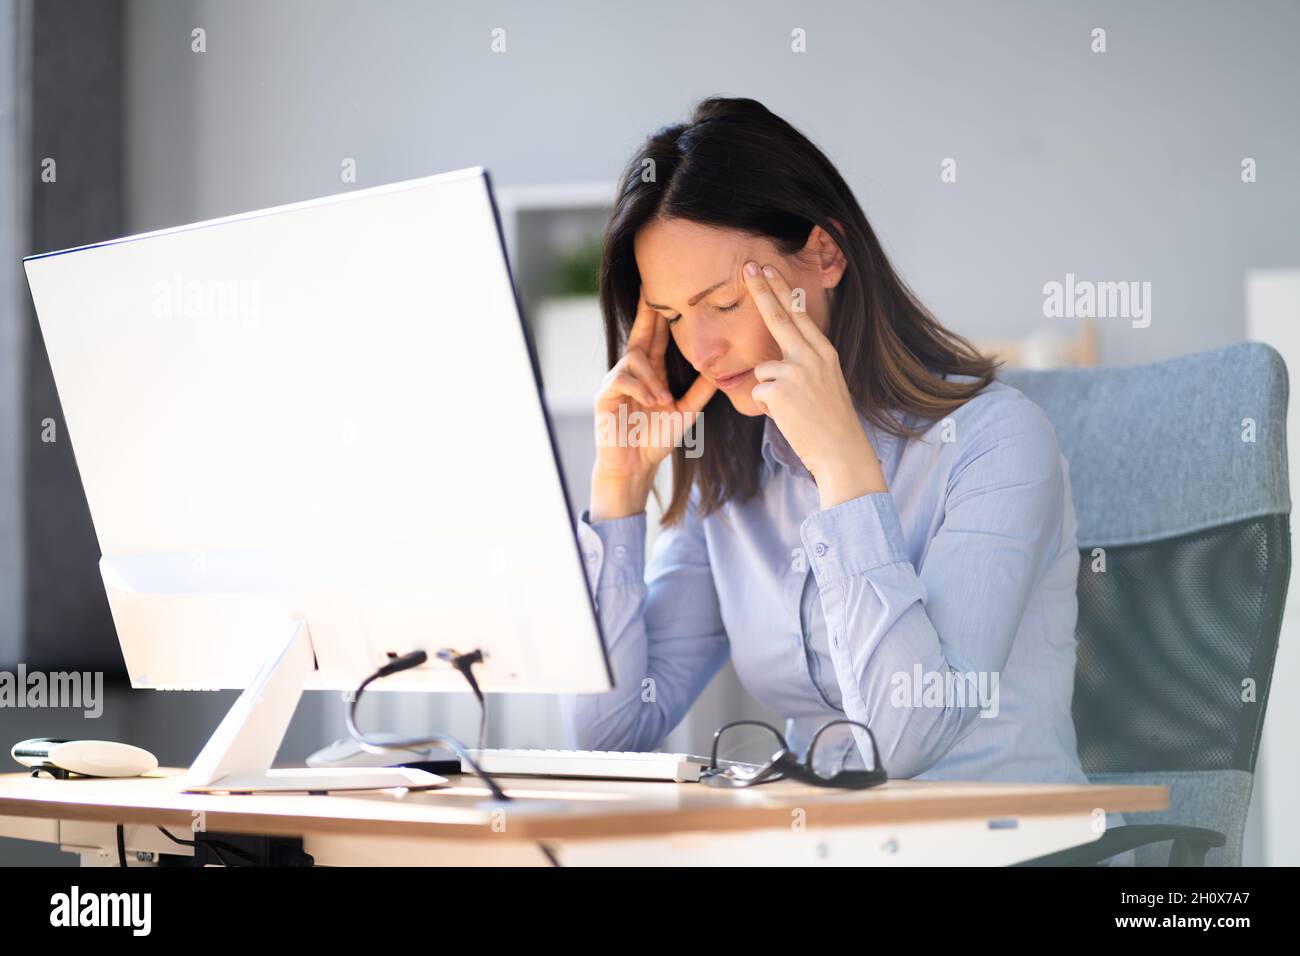 Depressed Business Woman In Office With Headache Stock Photo